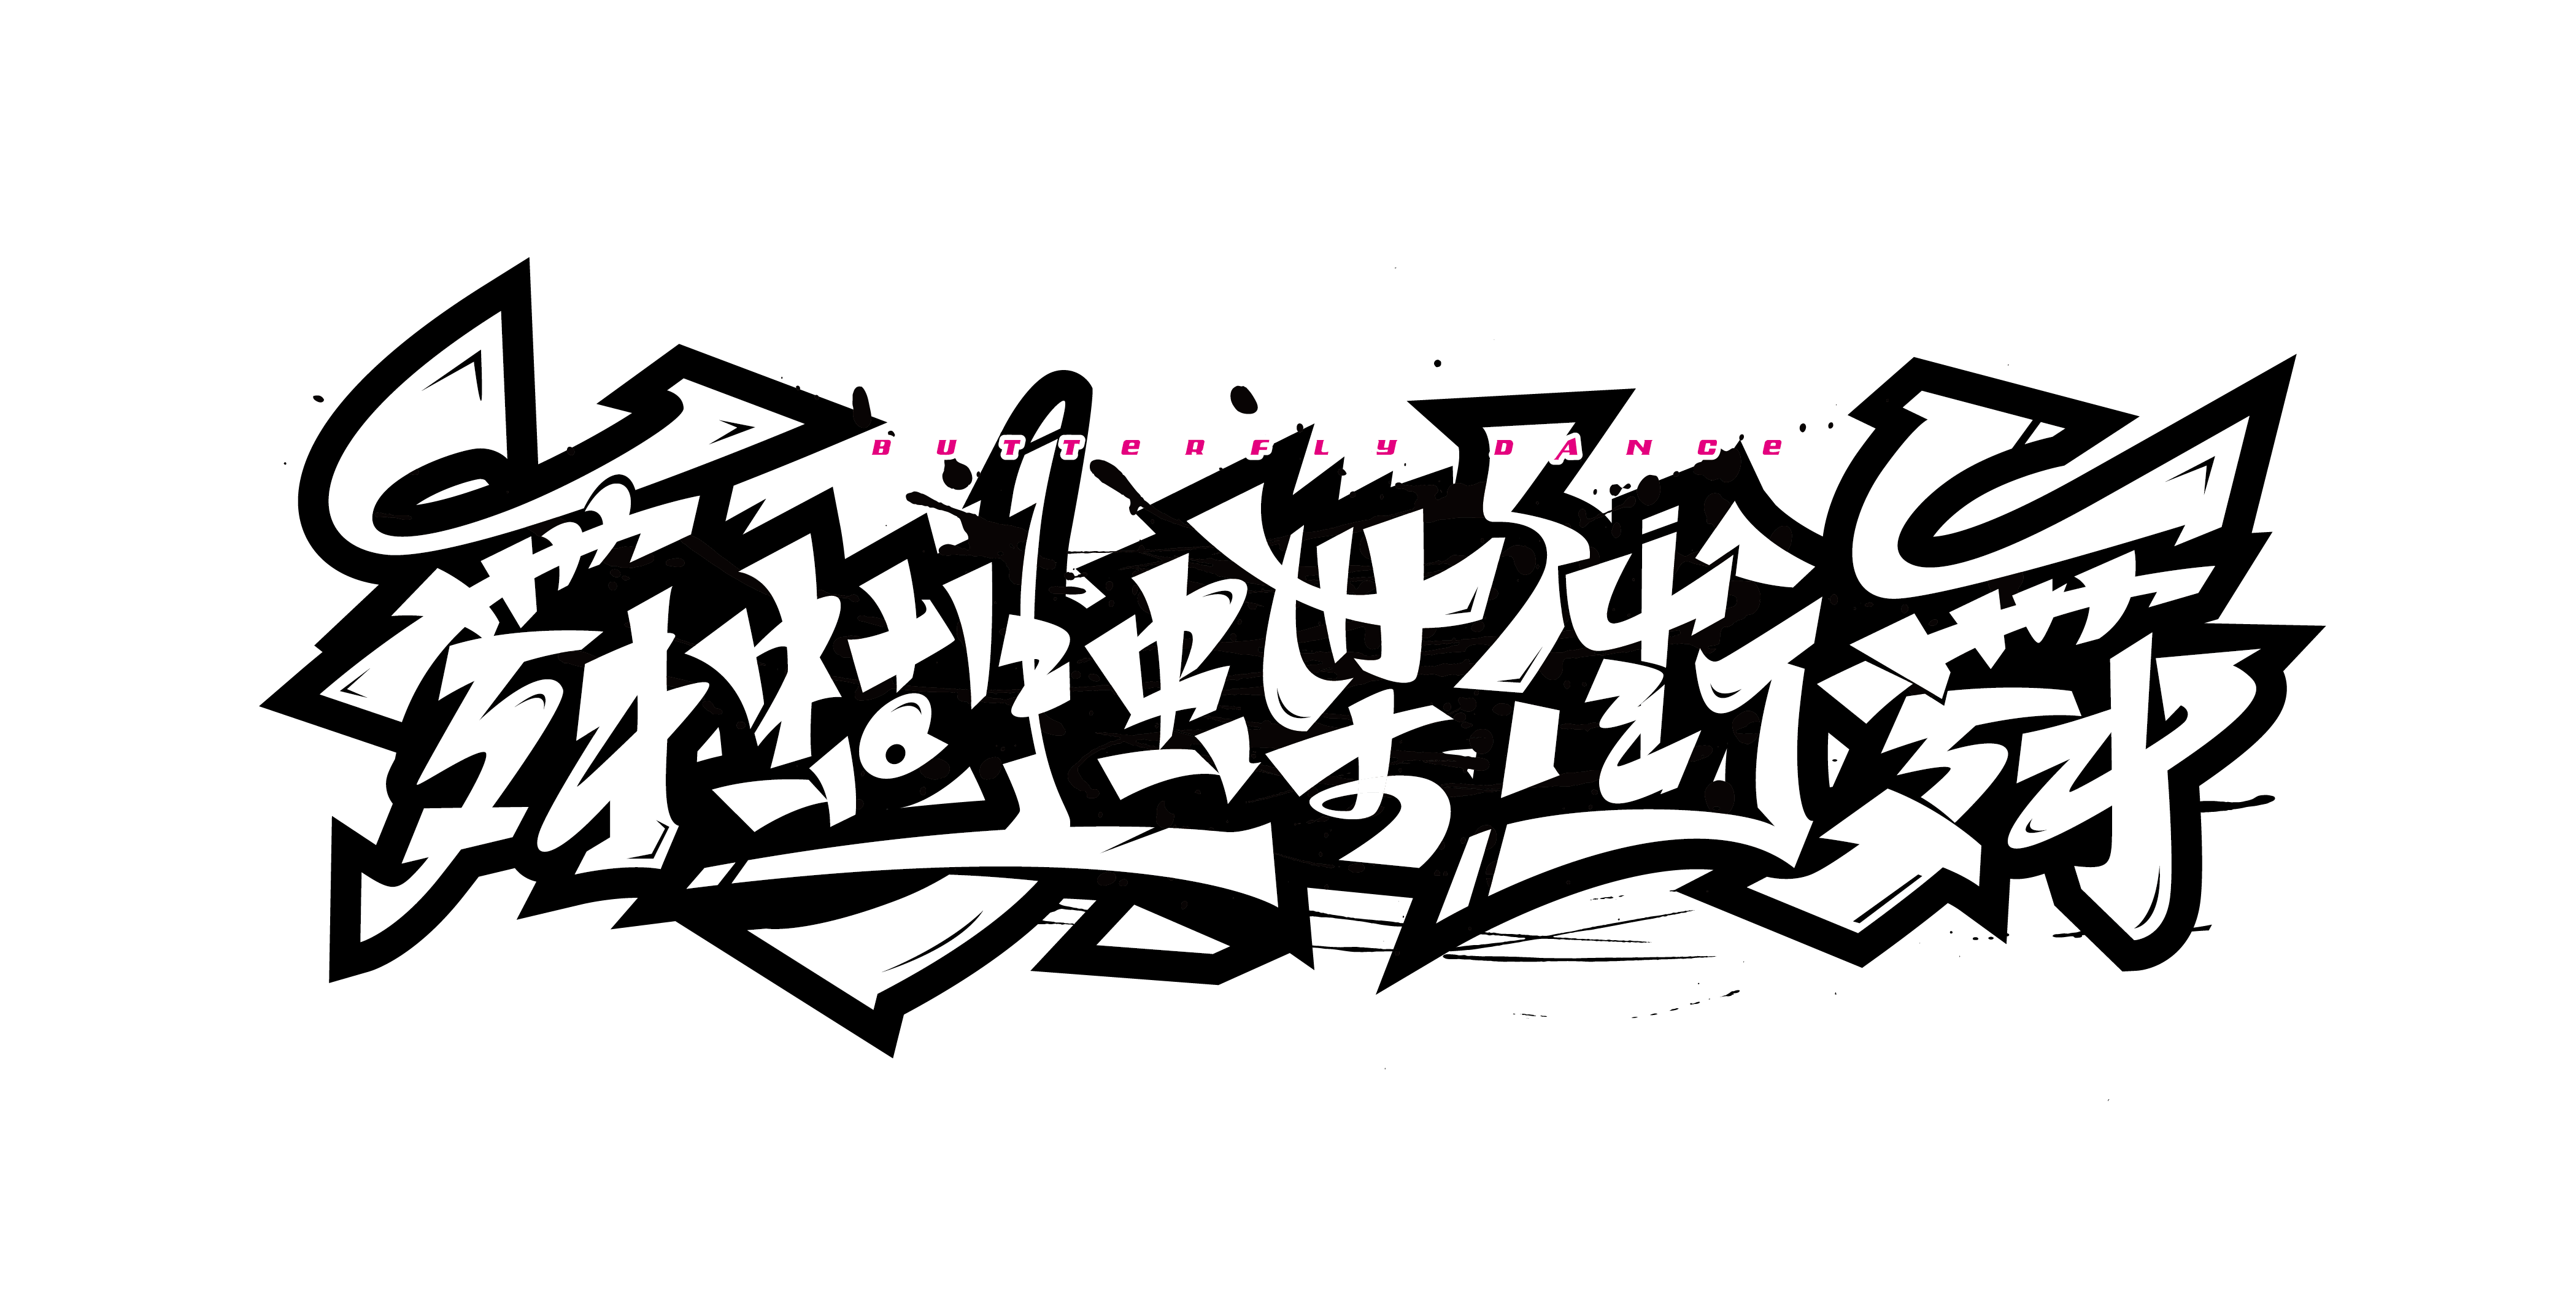 A collection of graffiti fonts on the wall beside the street – Free